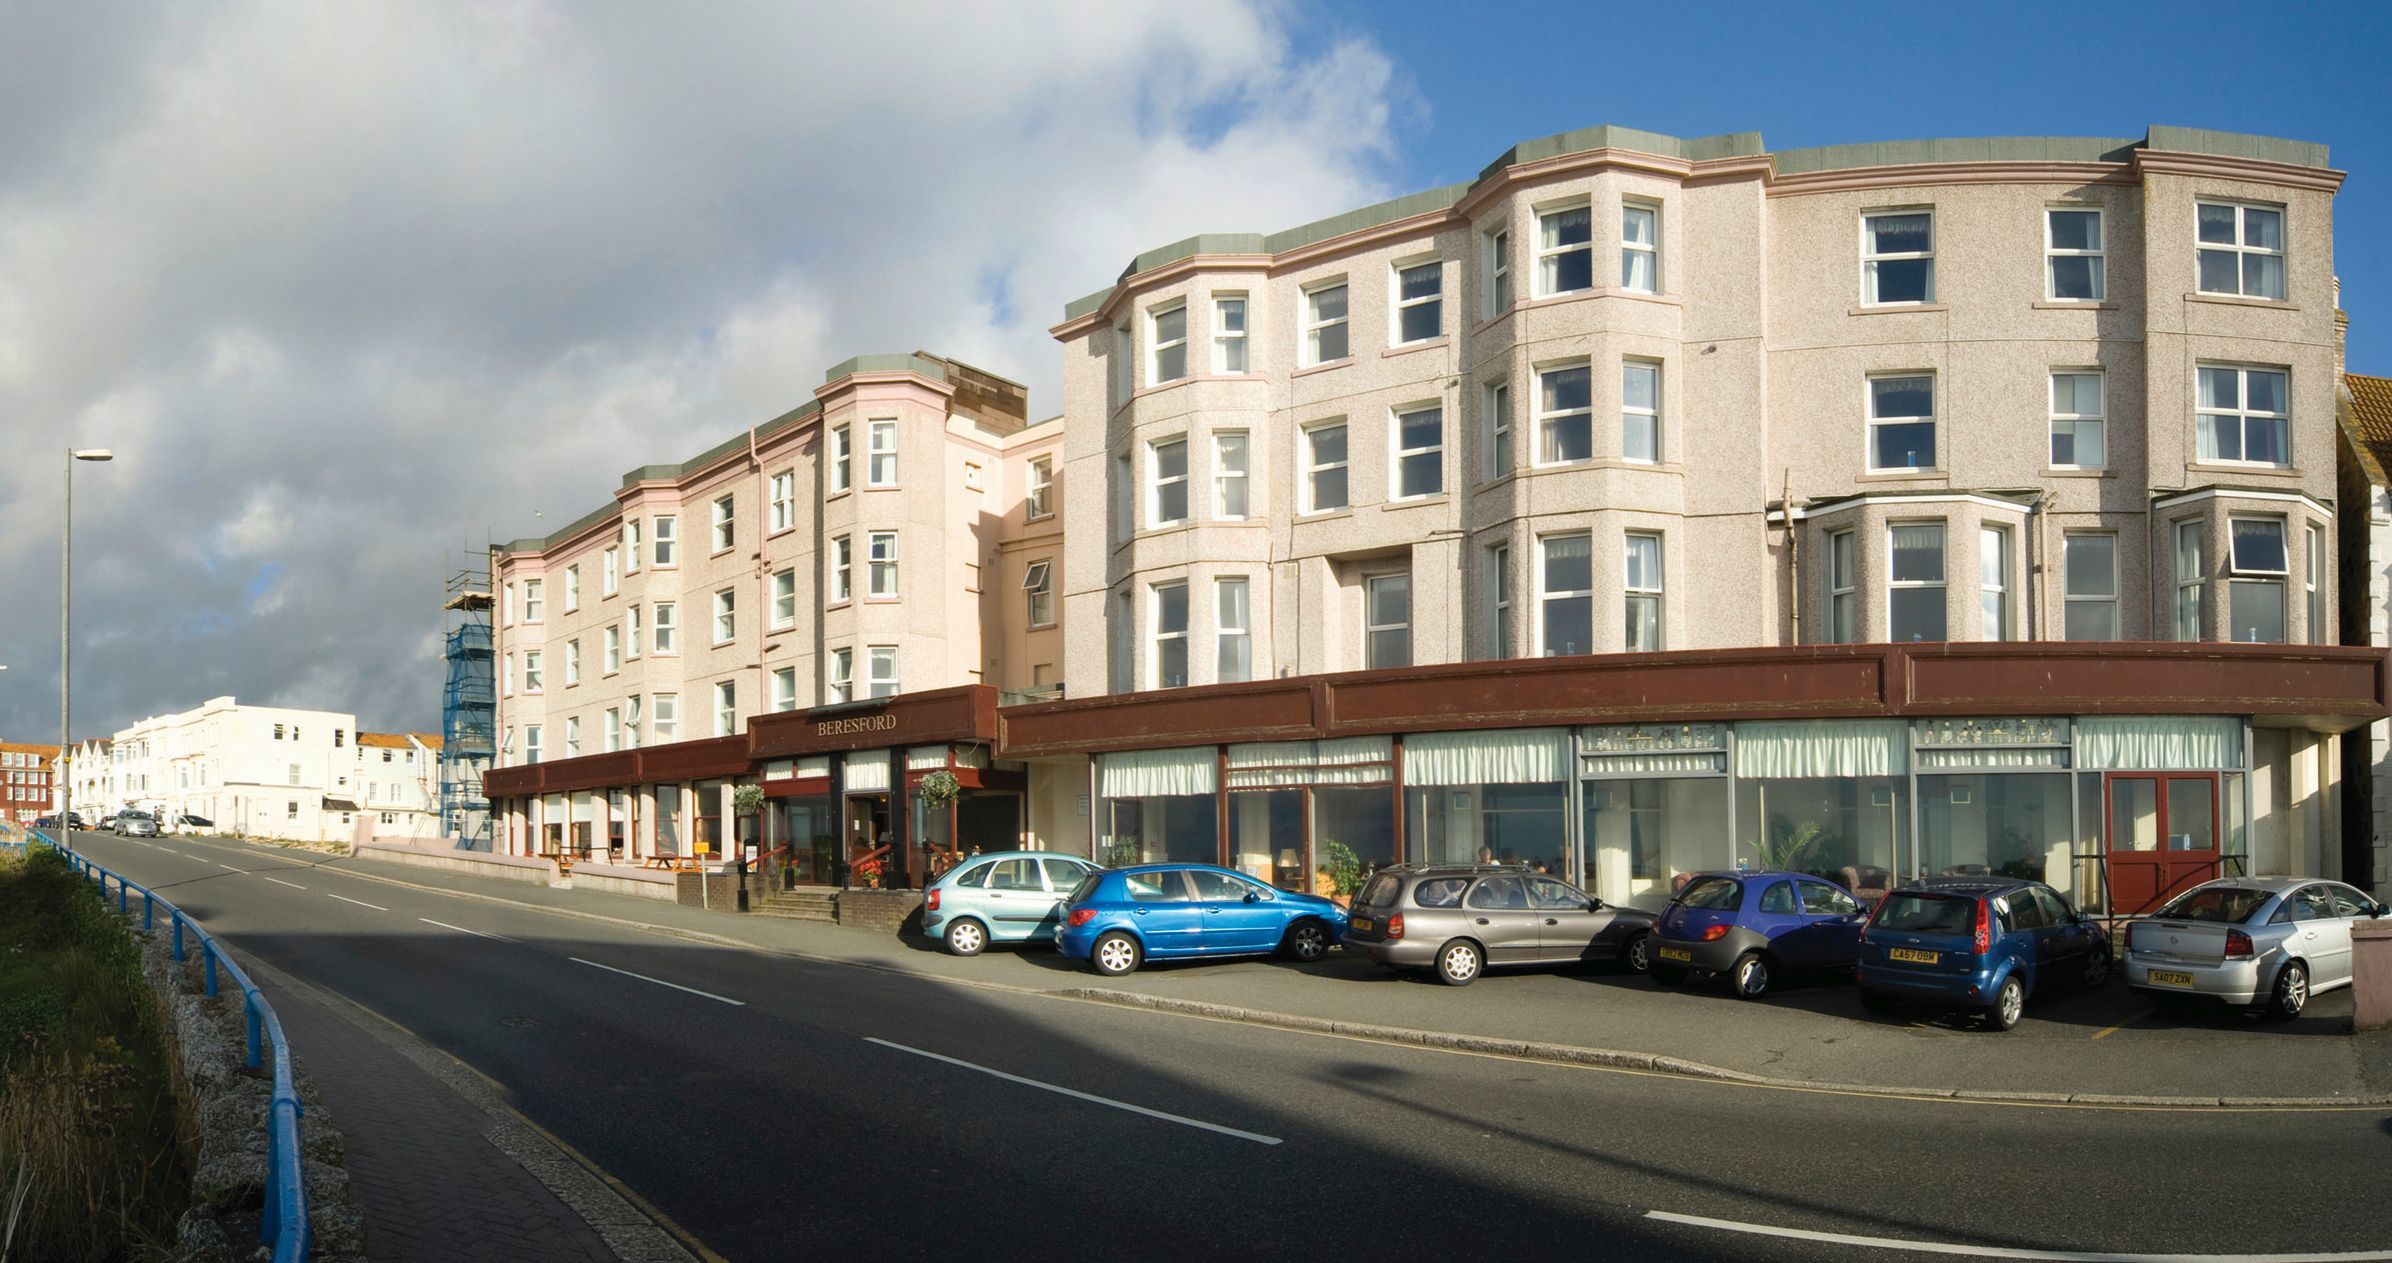 The Beresford hotel in Newquay